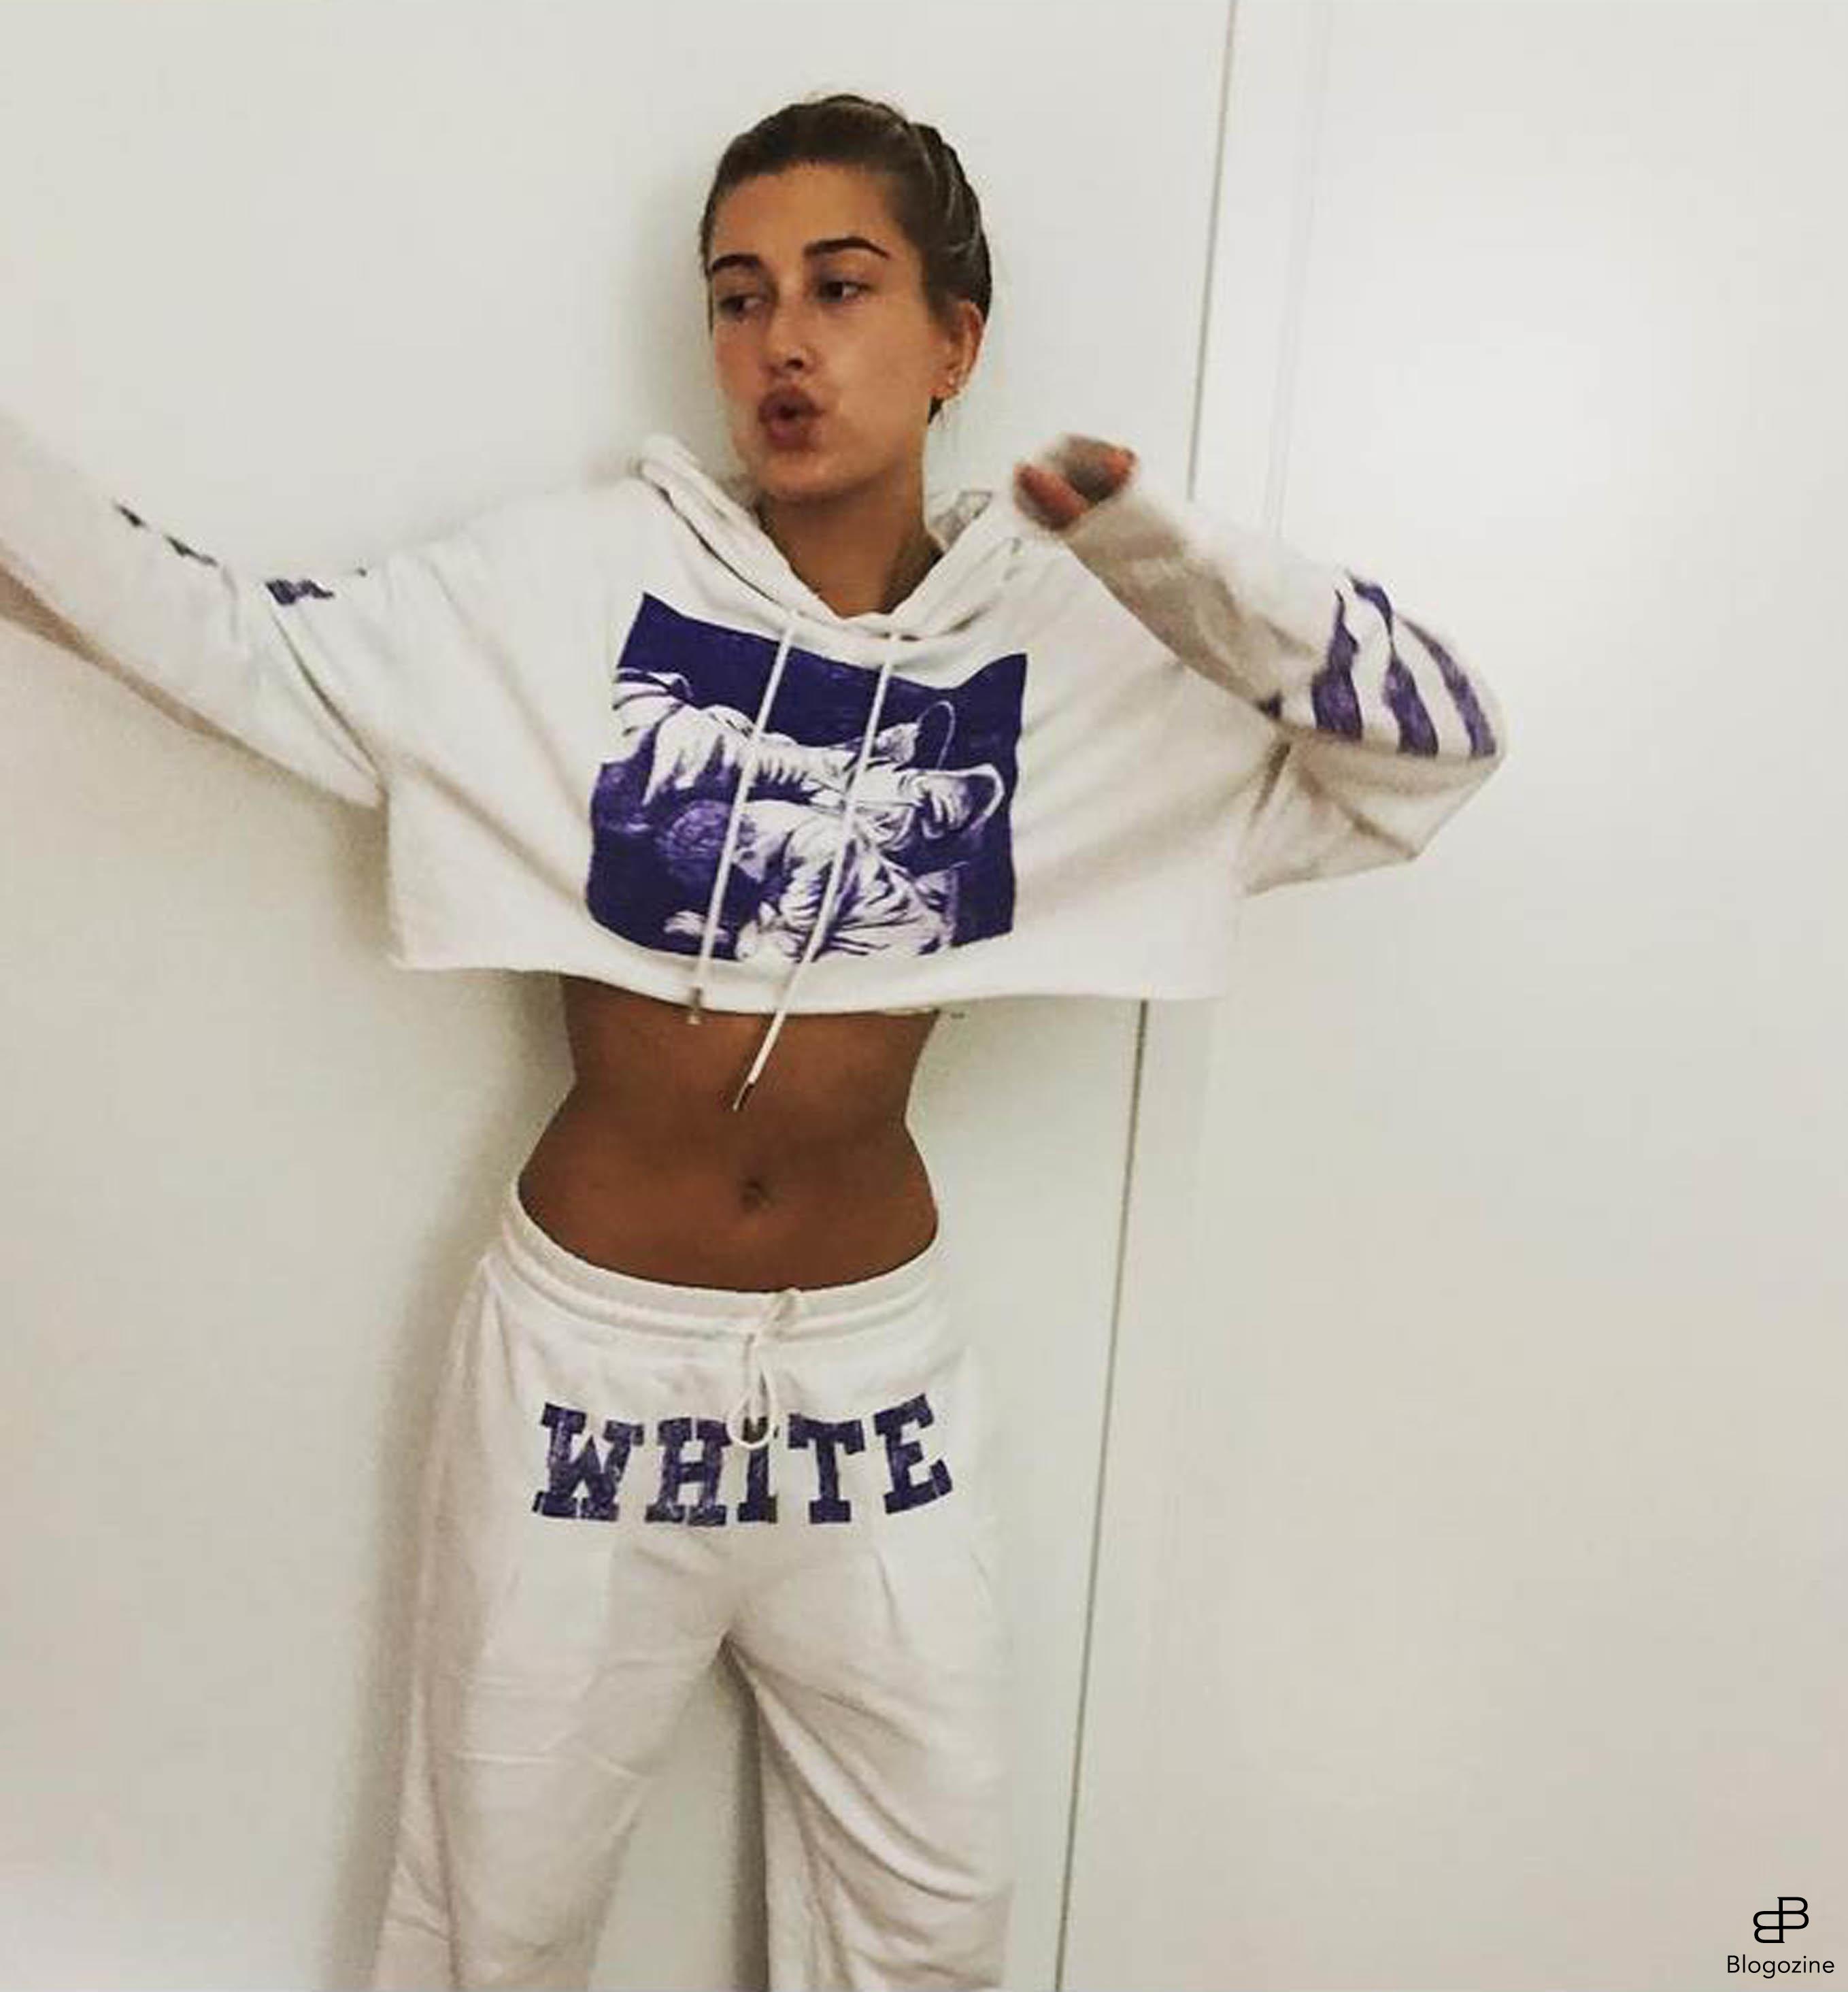 6334022 10-10-2016 Celebrity Selfies Pictured: Hailey Baldwin PLANET PHOTOS www.planetphotos.co.uk info@planetphotos.co.uk +44 (0)20 8883 1438 DISTR. STELLA PICTURES